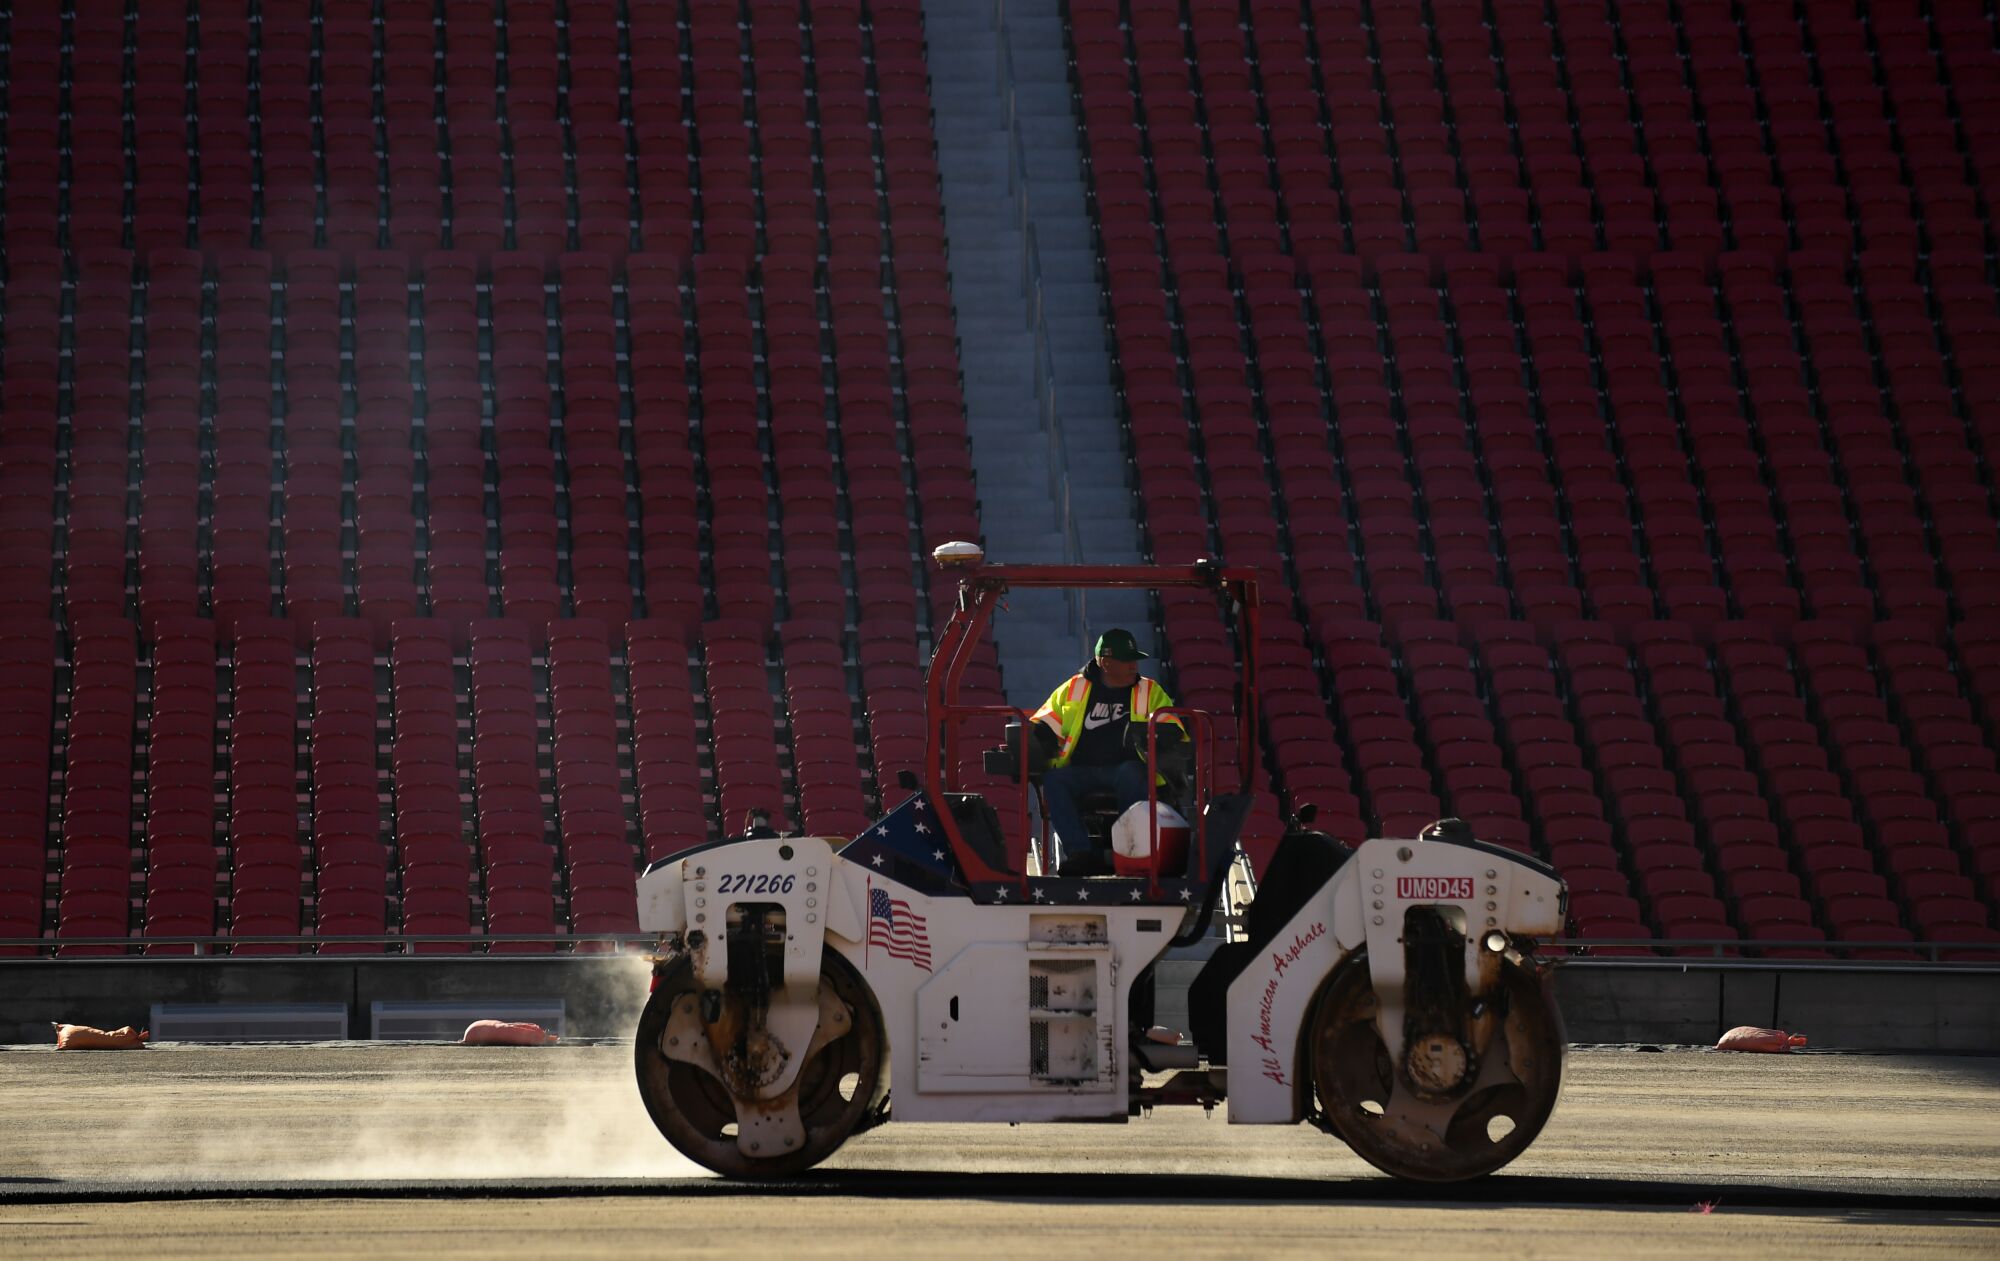 Work crews begin paving the track at the Coliseum in preparation for a NASCAR race.